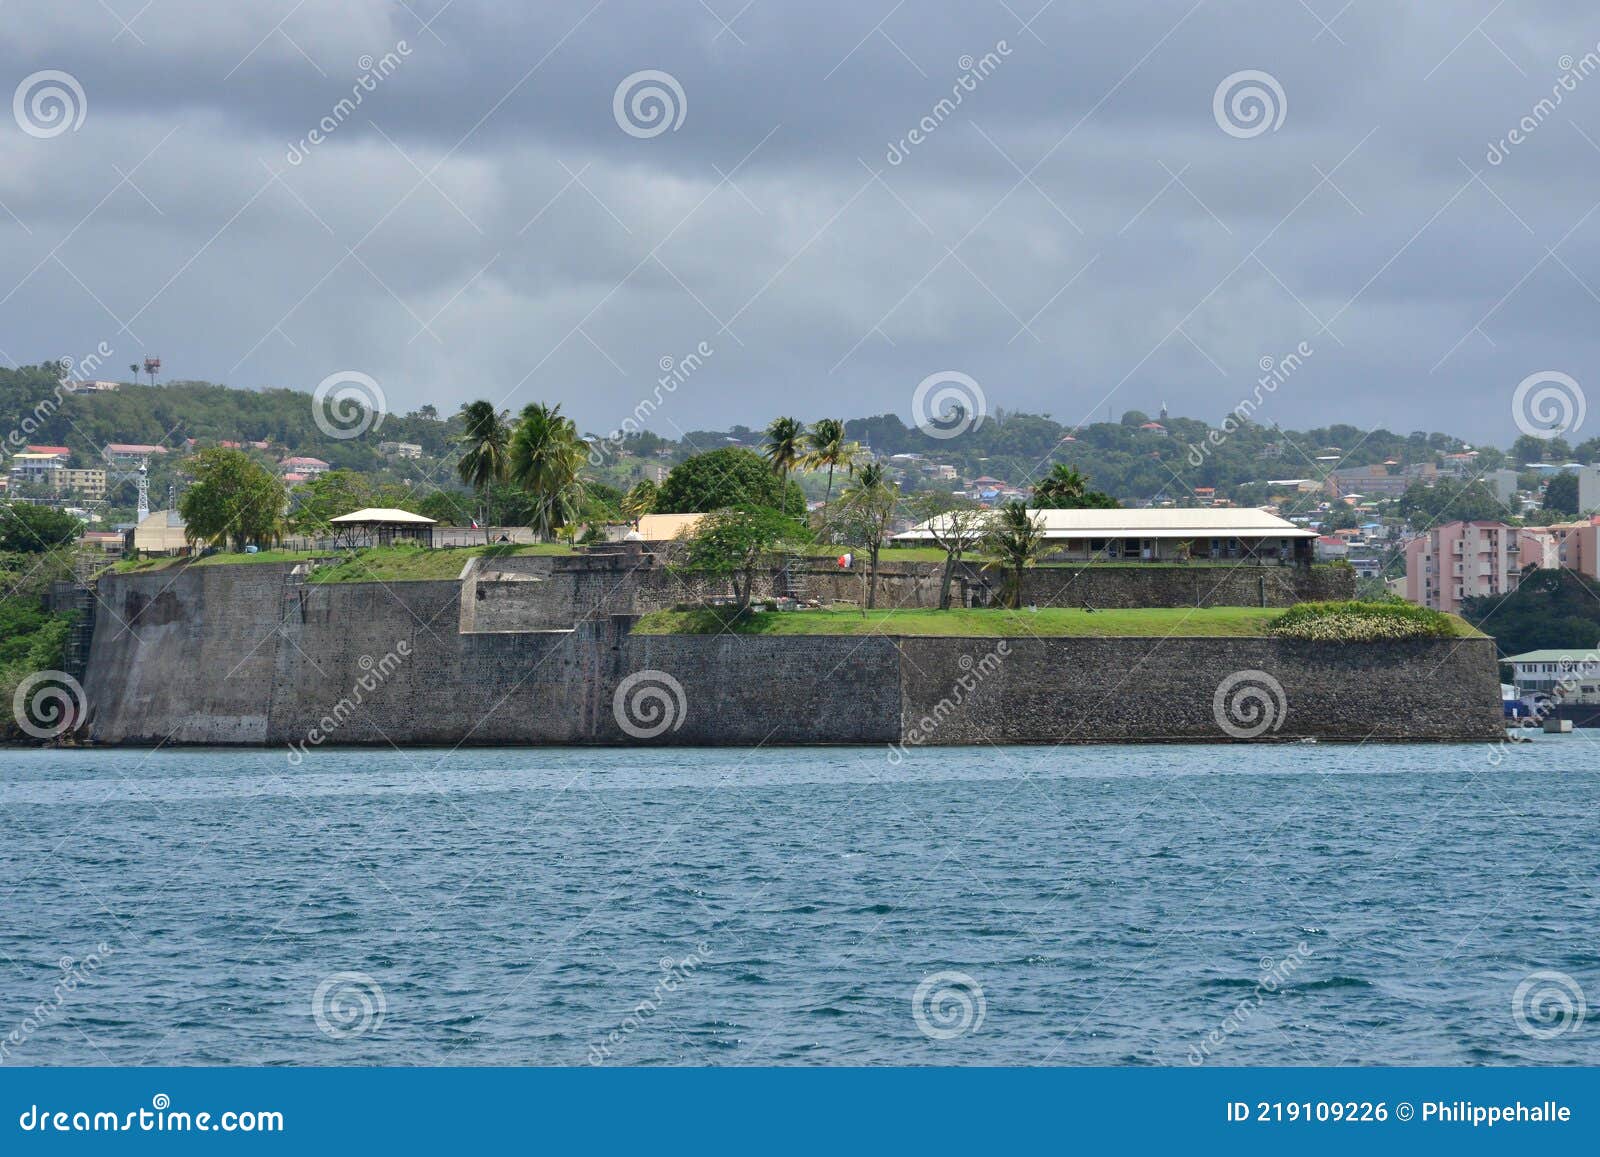 Martinique, Picturesque City of Fort De France Editorial Photo - Image ...